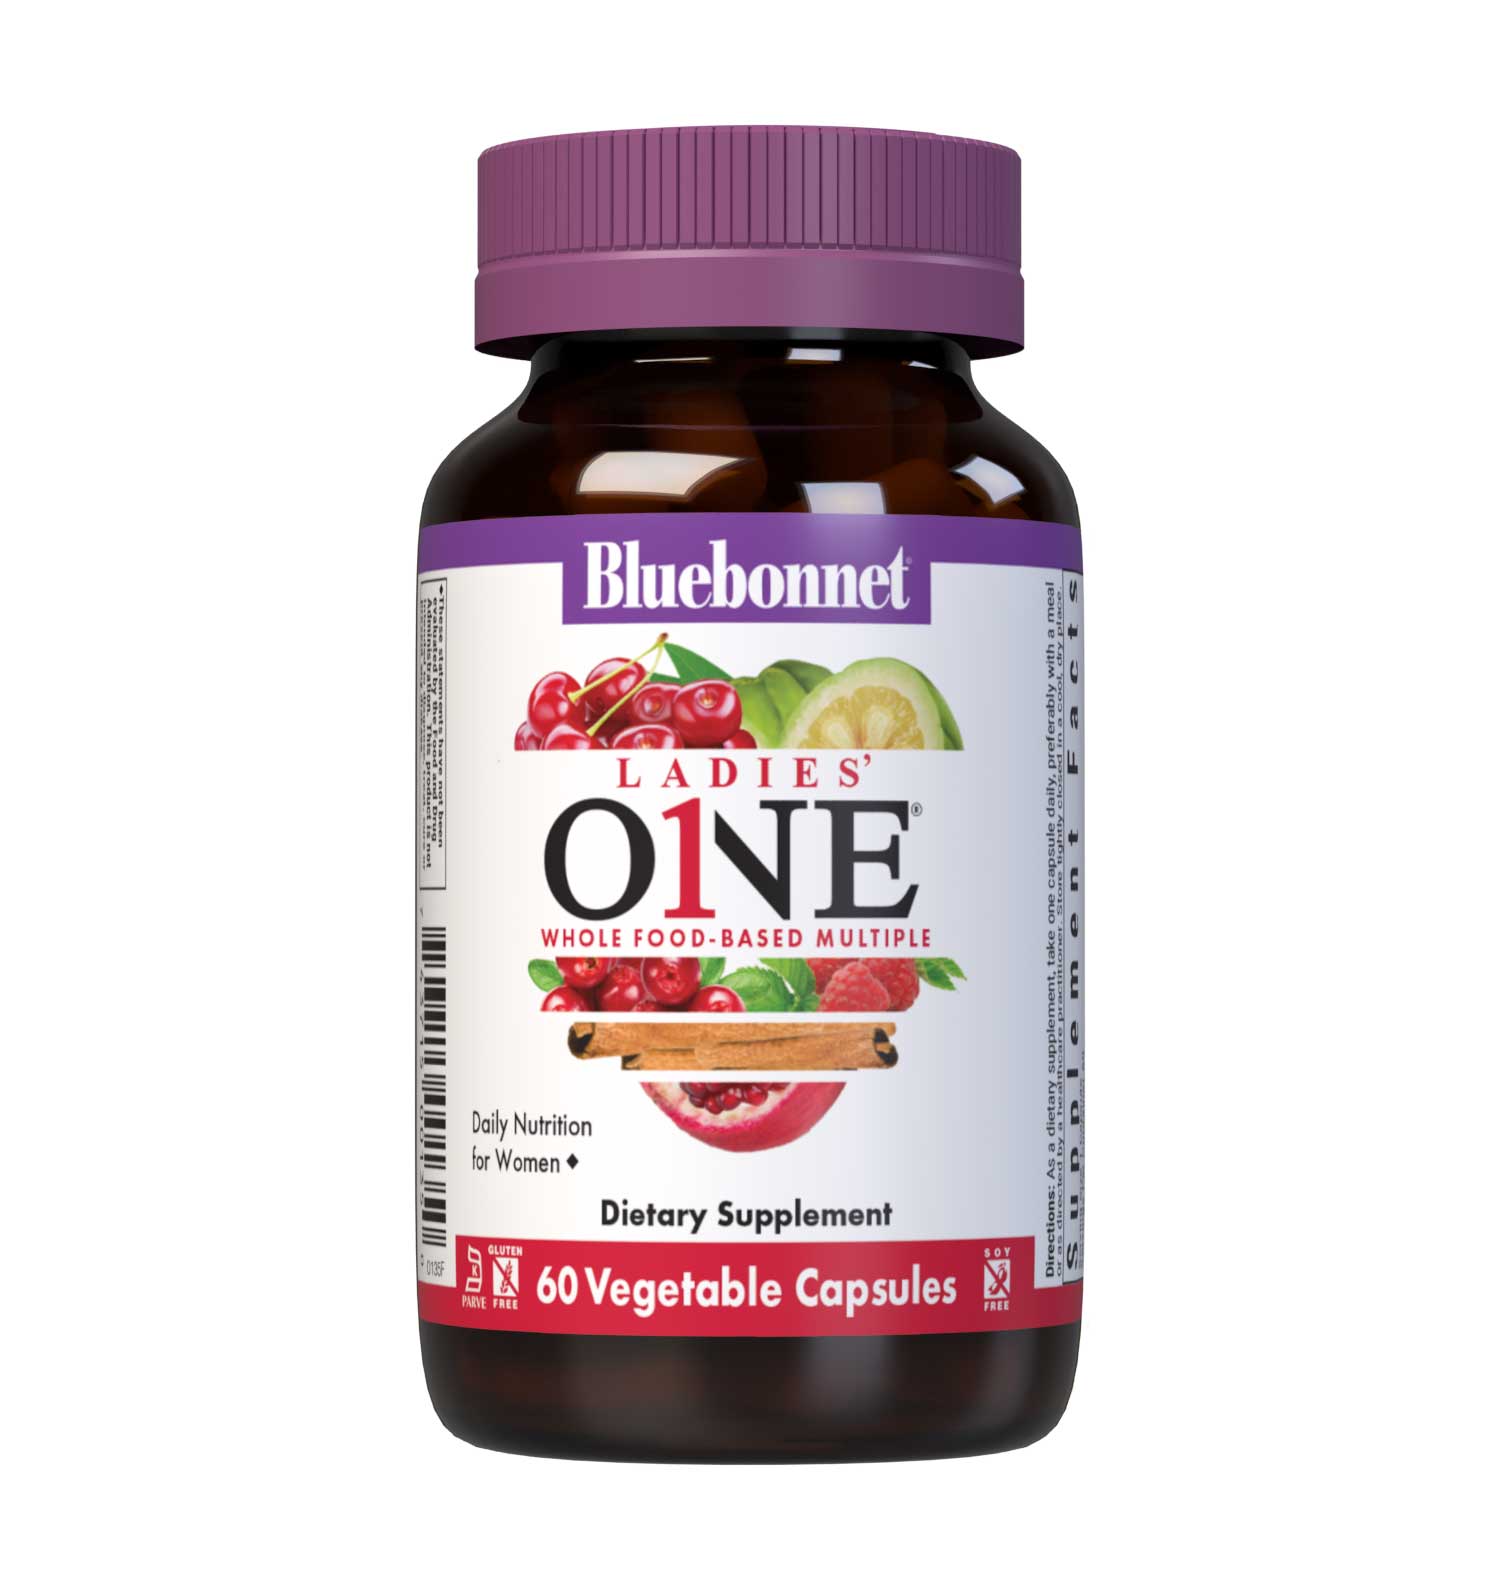  Bluebonnet’s Ladies' One Whole Food-Based Multiple 60 vegetable capsules is formulated with over 25 crucial nutrients like vitamin K2 and vitamin E from sunflower, all the coenzyme forms of the B vitamins, plus Albion chelated minerals in addition to an organic whole food vegetable blend, a plant-sourced enzyme blend, and a unique female health blend for daily nutrition and well being. #size_60 count